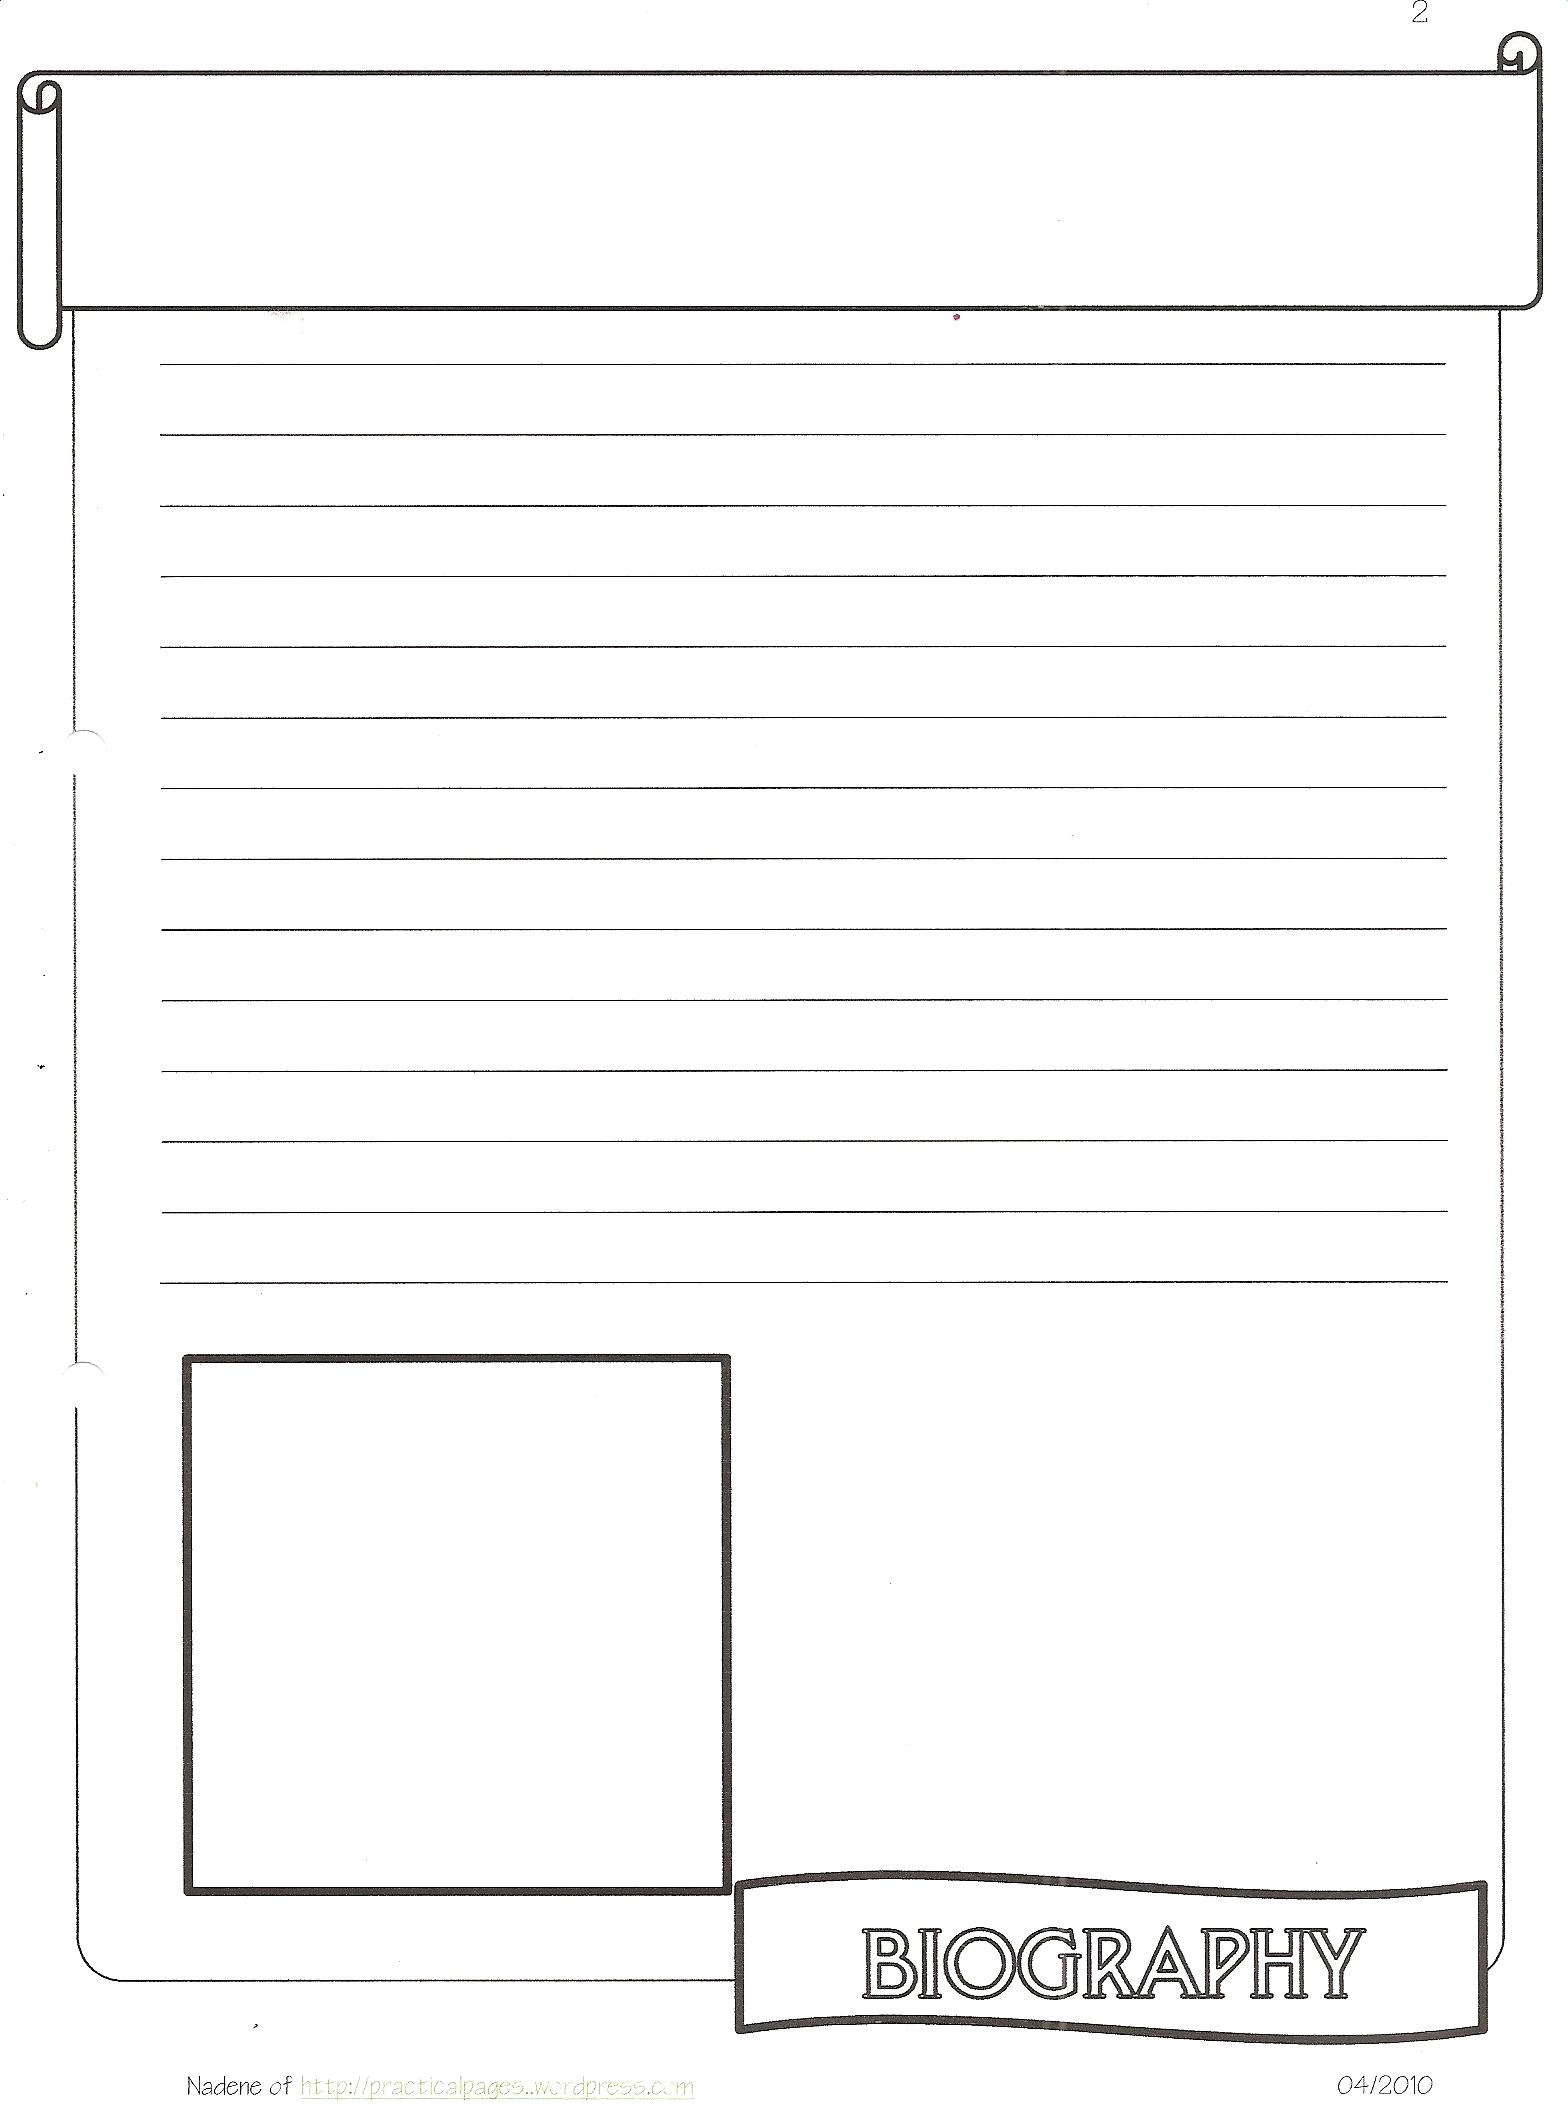 New Biography Notebook Page Templates  Practical Pages With Free Bio Template Fill In Blank